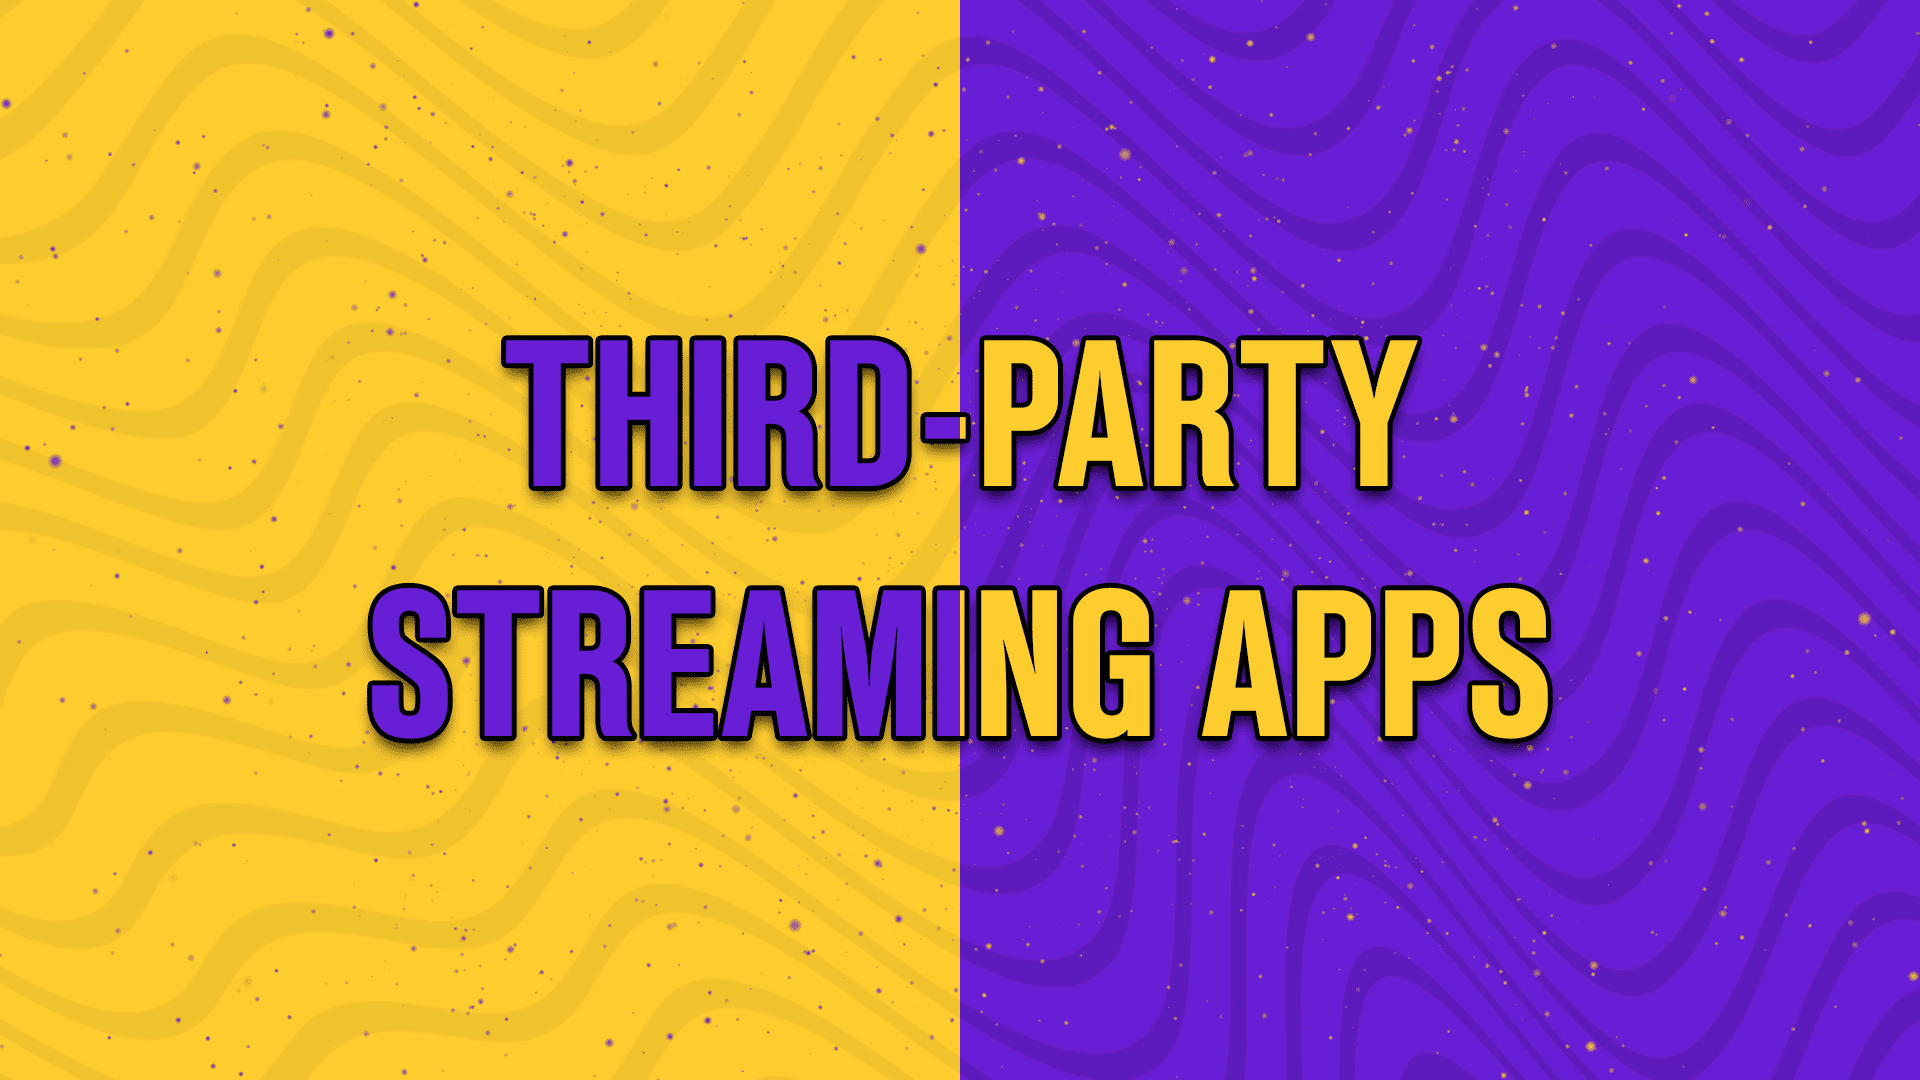 third party streaming apps - StreamBee